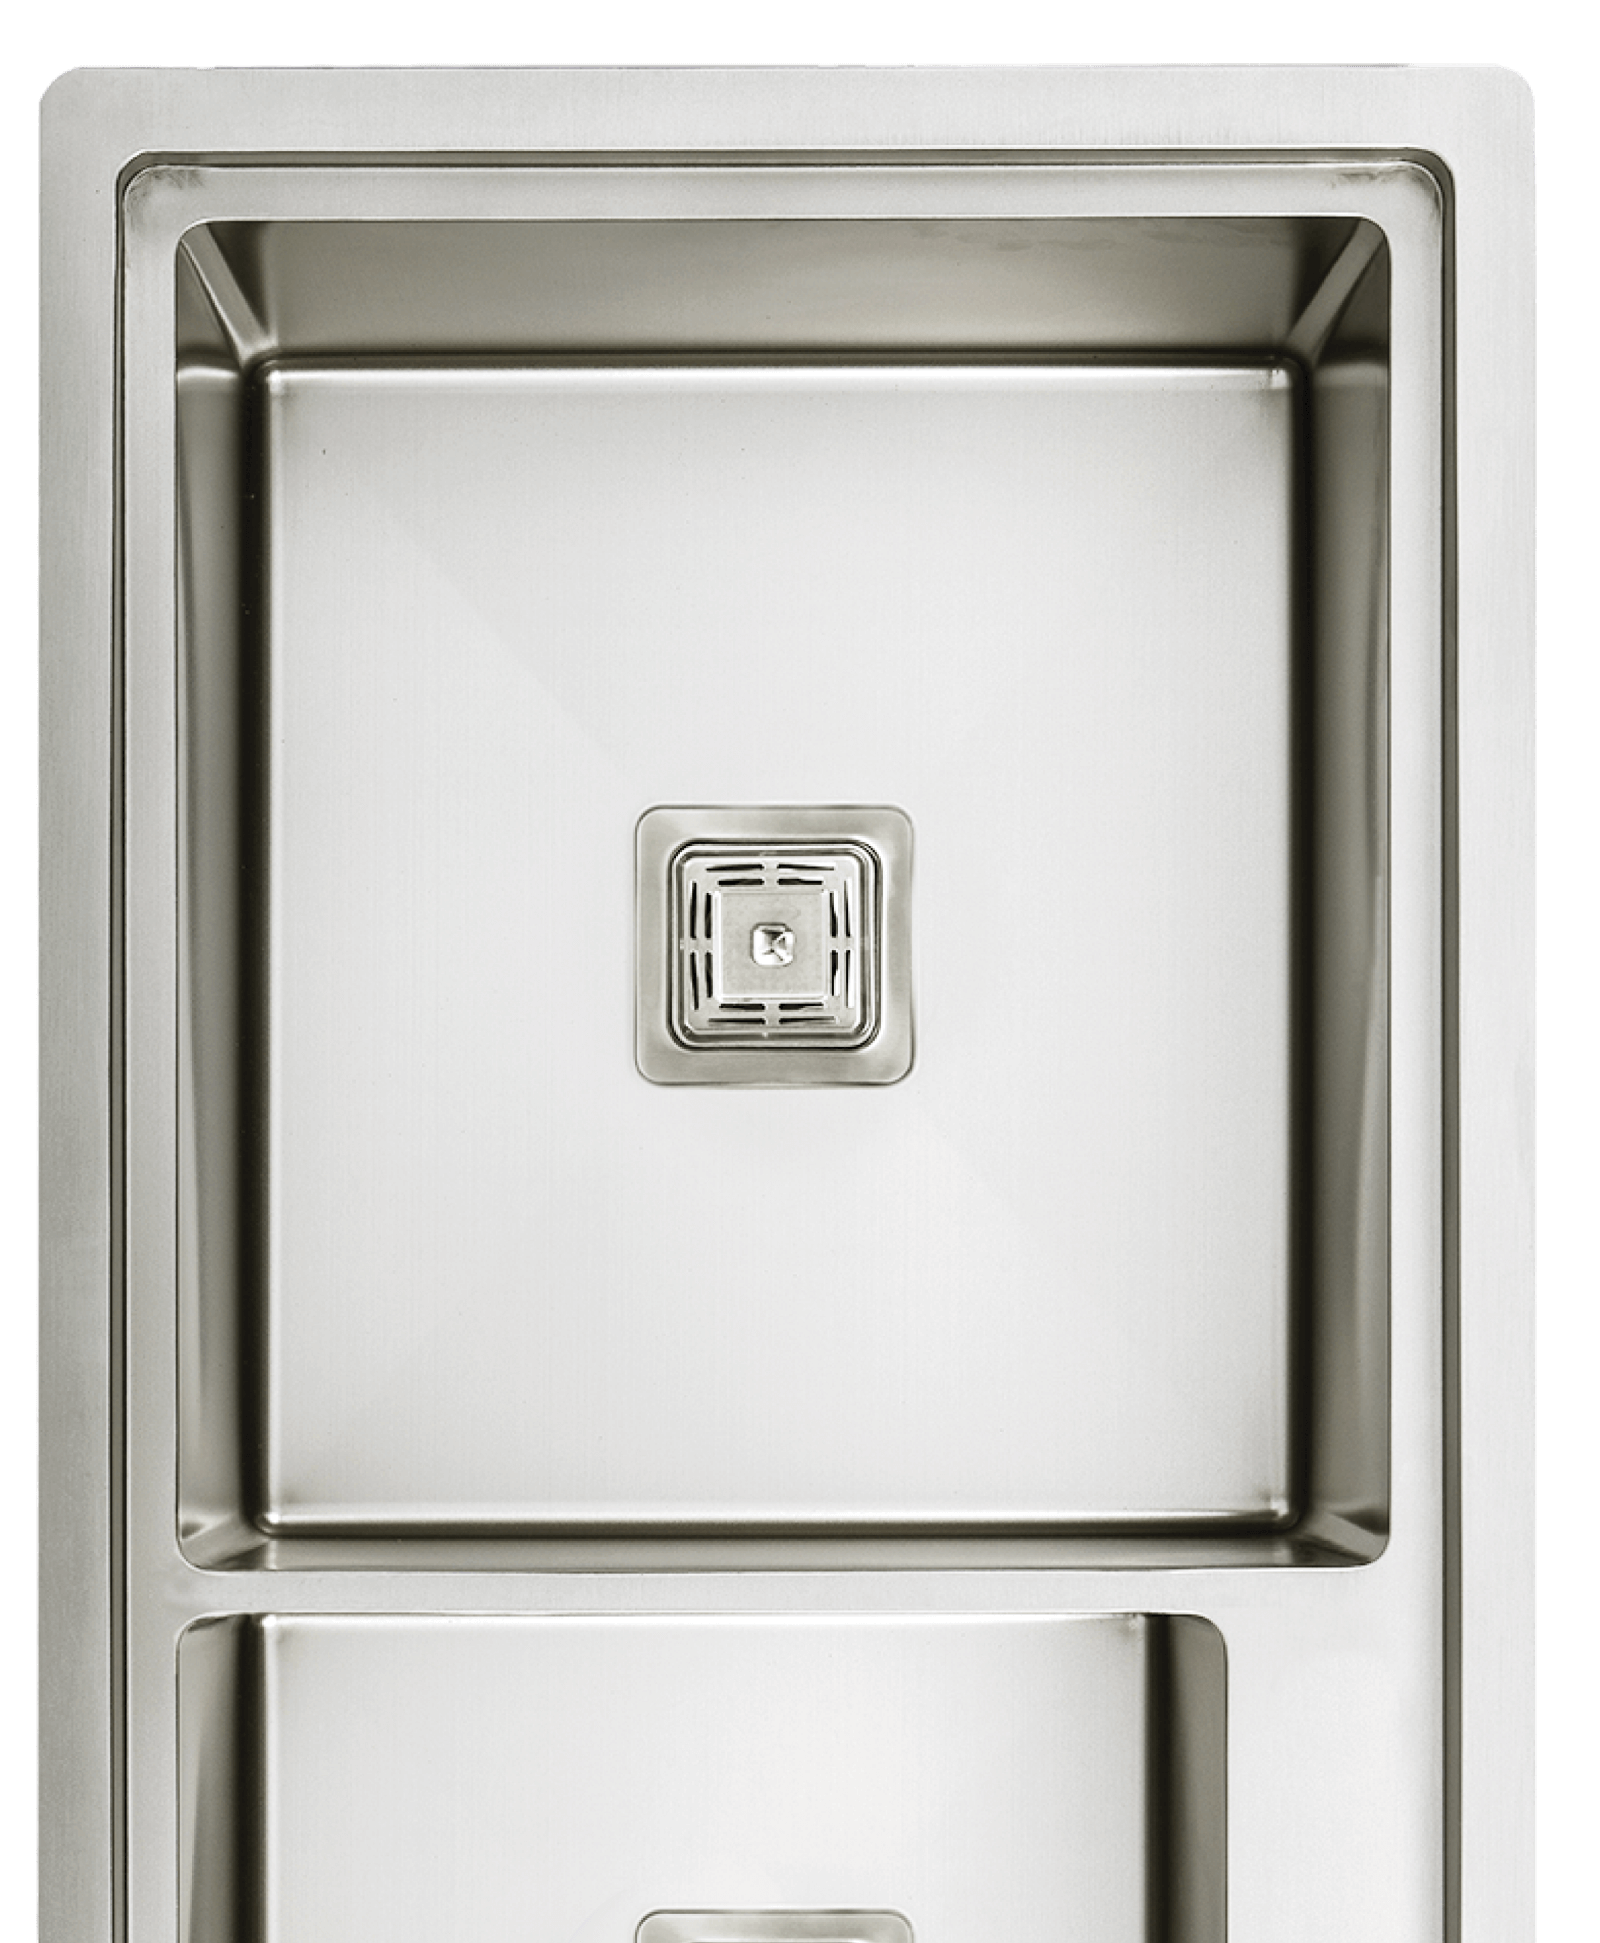 R10 Series Sink Cover Picture